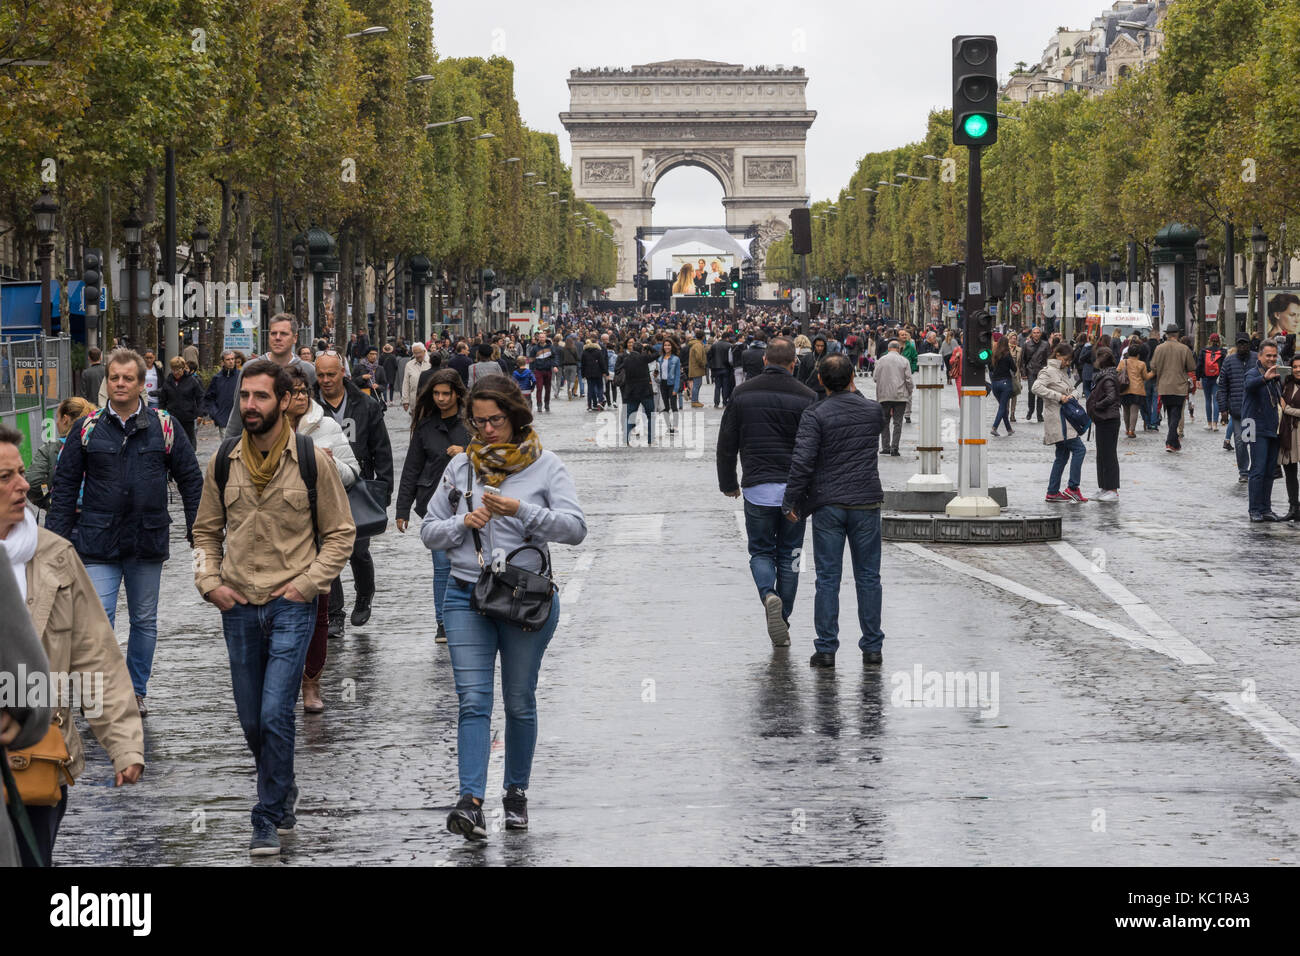 Paris, France. 01 October 2017. People walking on the Champs-Elysées. For the first day without cars in the whole city of Paris, Parisians and tourists enjoyed the streets without the usual traffic. © David Bertho/ Alamy Live News Stock Photo